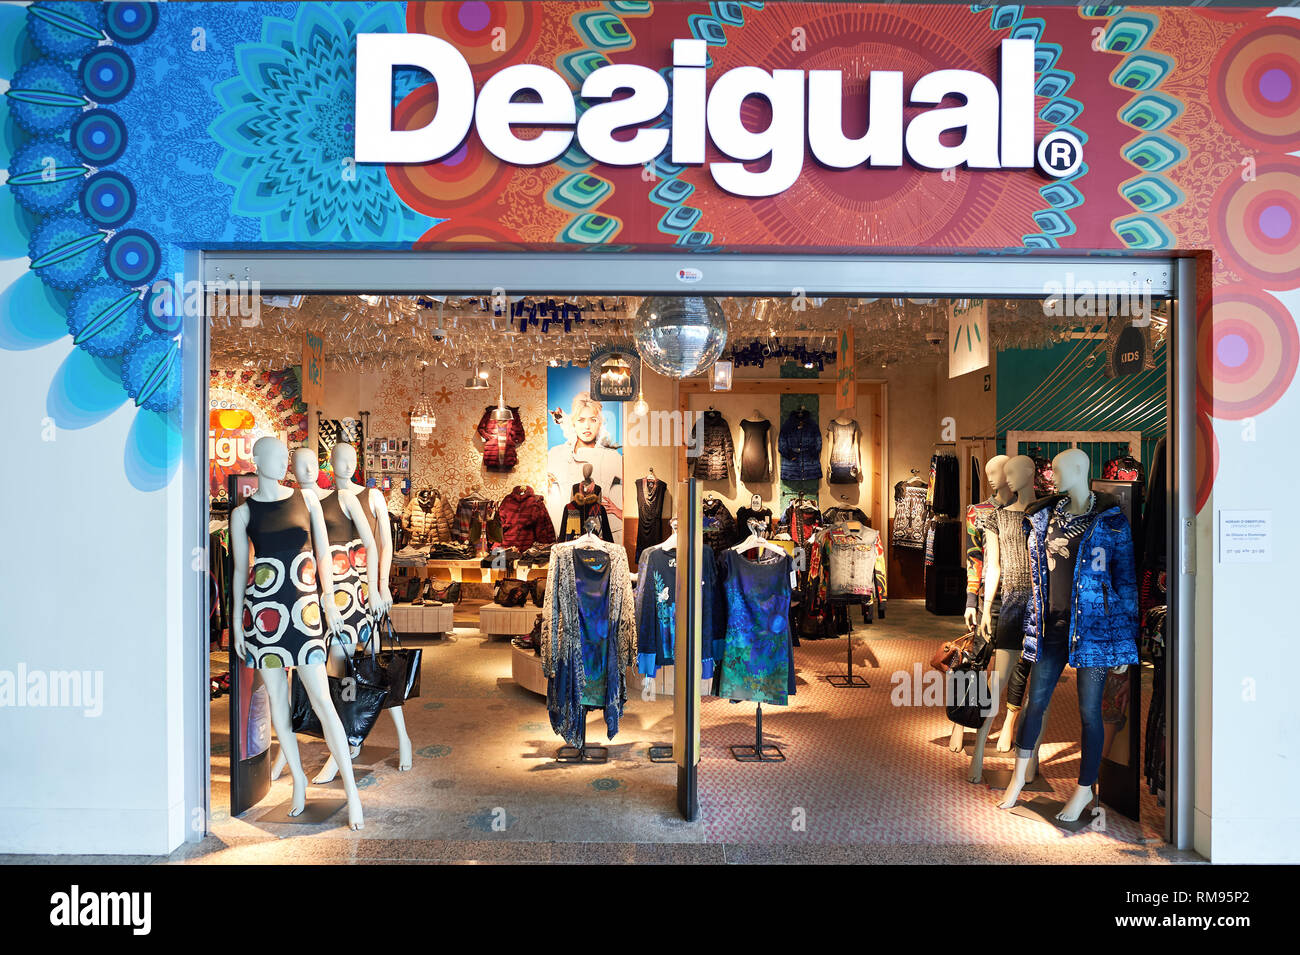 Desigual Fashion Store In San Sebastian Spain Stock Photo Download Image  Now Adult, Arts Culture And Entertainment, Barcelona Spain IStock |  lupon.gov.ph